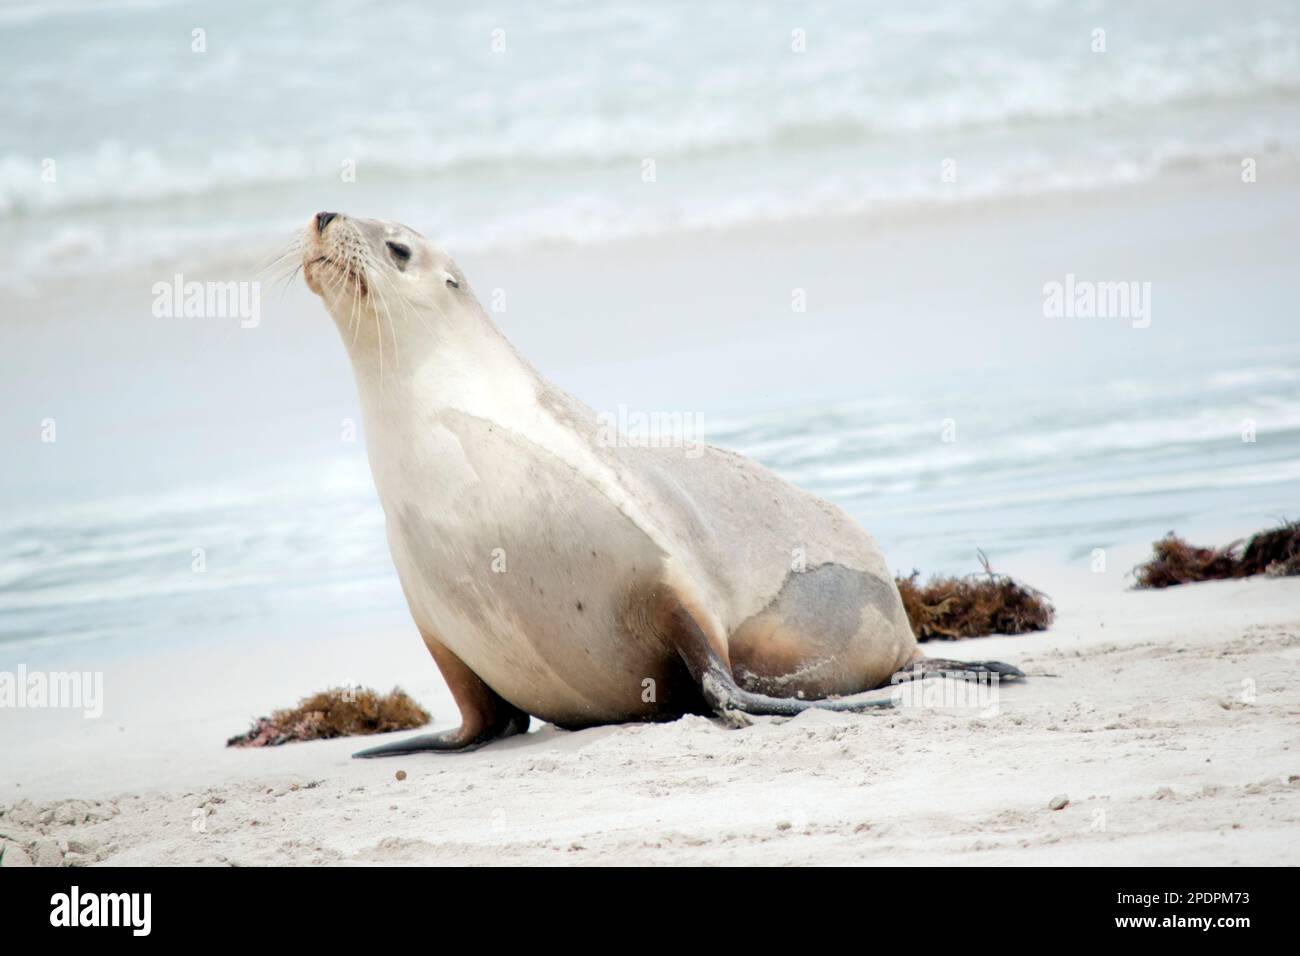 the sea lion is looking for her pup on the beach Stock Photo